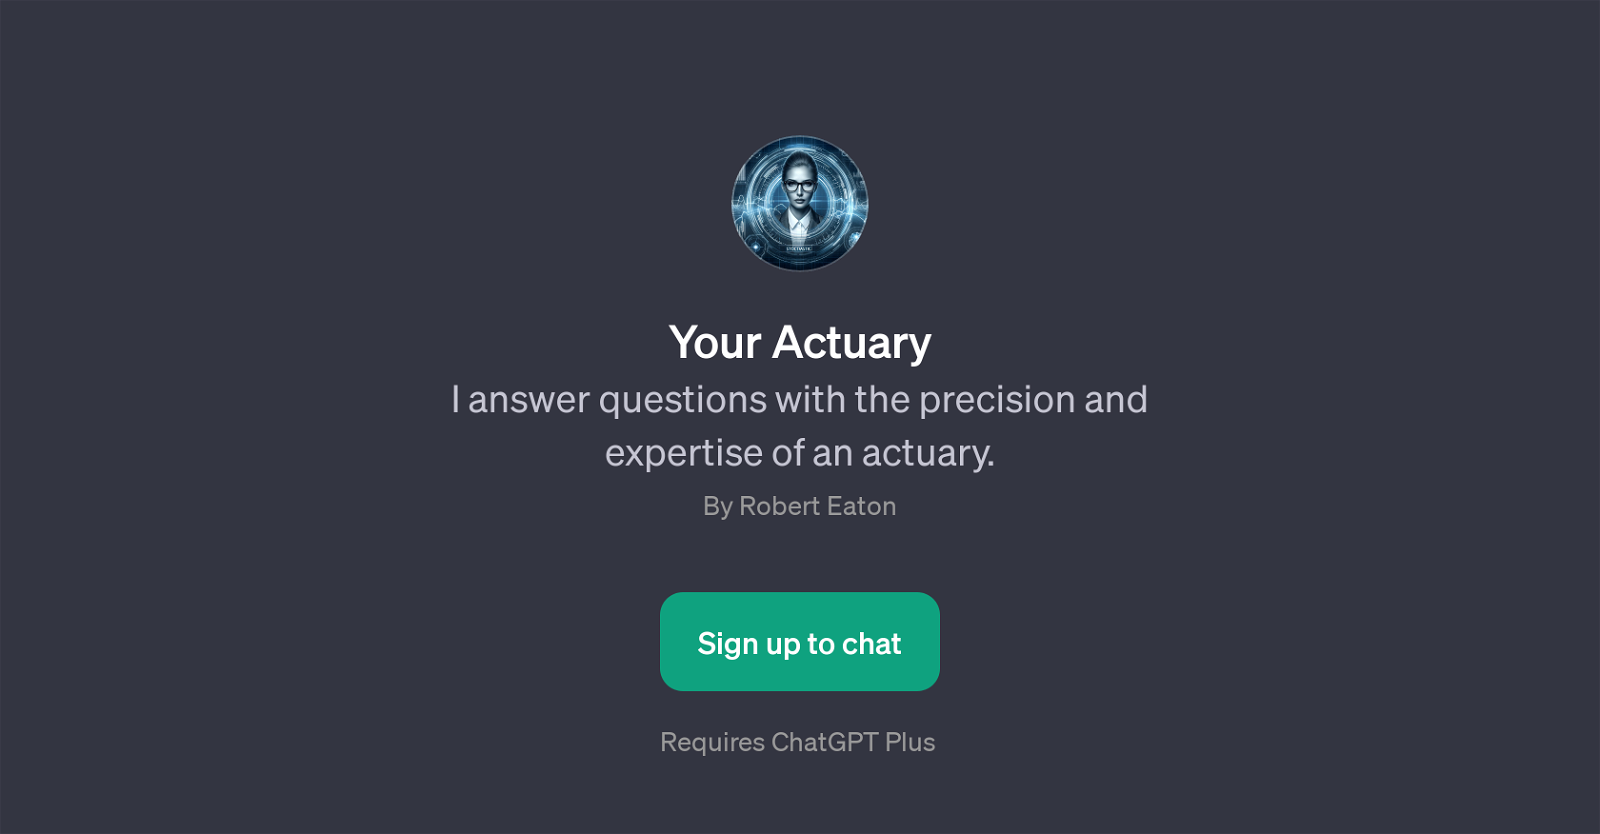 Your Actuary website